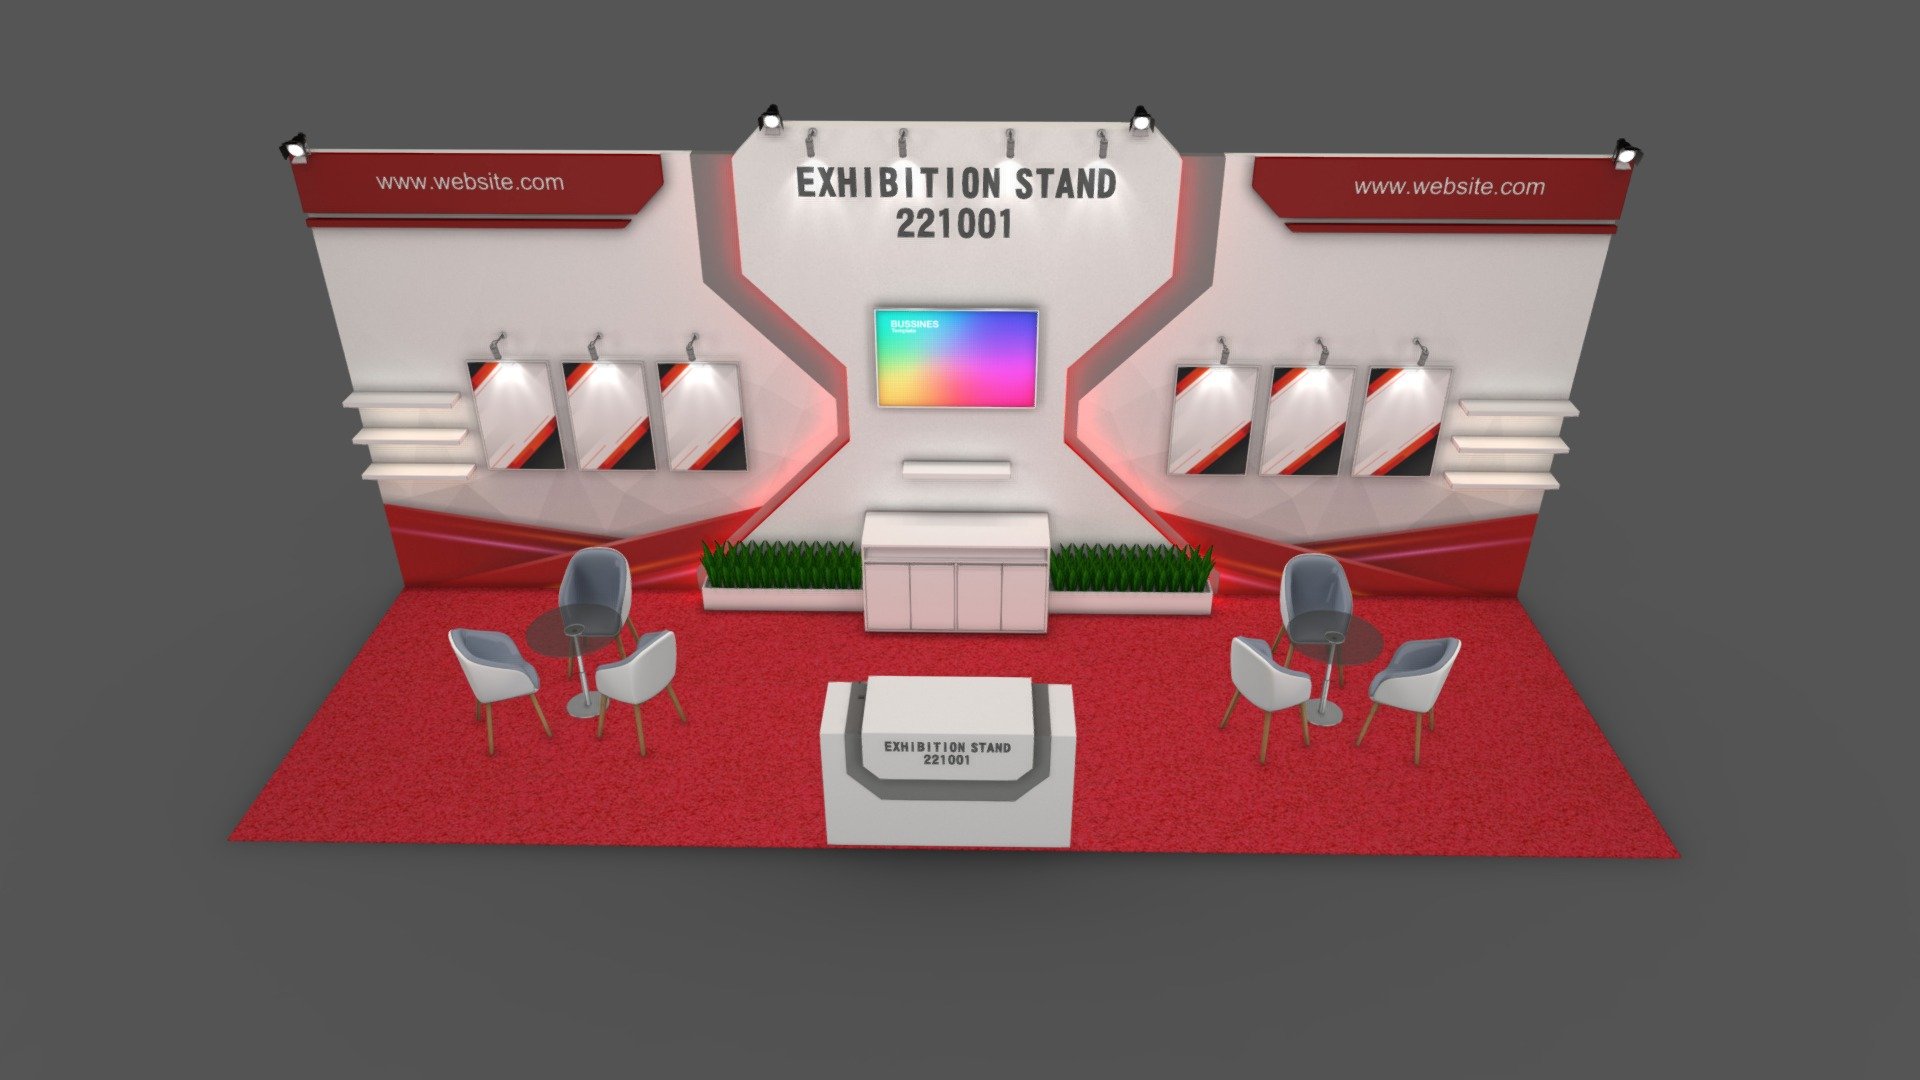 Exhibition (Stand, booth, stall) Design

27 sqm / 9x3m - 3 exposed sides booth layout

Format: 

1. Autodesk 3Ds max 2020 / V ray 5

2. Autodesk 3Ds max 2017 / Default scanline

3. Obj Format


EXHIBITION STAND_221001_obj standard map

EXHIBITION STAND_221001_obj V ray complete map

4. Fbx format


EXHIBITION STAND_221001_fbx standard map

EXHIBITION STAND_221001_fbx V ray complete map

Unit: cm

thank you for visiting / download
If you are interested in other models, please visit my collection



EXHIBITION STAND 36 Sqm
https://sketchfab.com/fasih.lisan/collections/exhibition-stand-36-sqm-34b6419aa7ec4556b18d8a381c51db77

EXHIBITION STAND 18 Sqm
https://sketchfab.com/fasih.lisan/collections/exhibition-stand-18-sqm-9a22add1012e4c36961b6e1db26a0280

EXHIBITION STAND 9 sqm
https://sketchfab.com/fasih.lisan/collections/exhibition-stand-9-sqm-2afc738a25634768ba5335da876876f2 - EXHIBITION STAND_221001 - Download Free 3D model by fasih.lisan 3d model